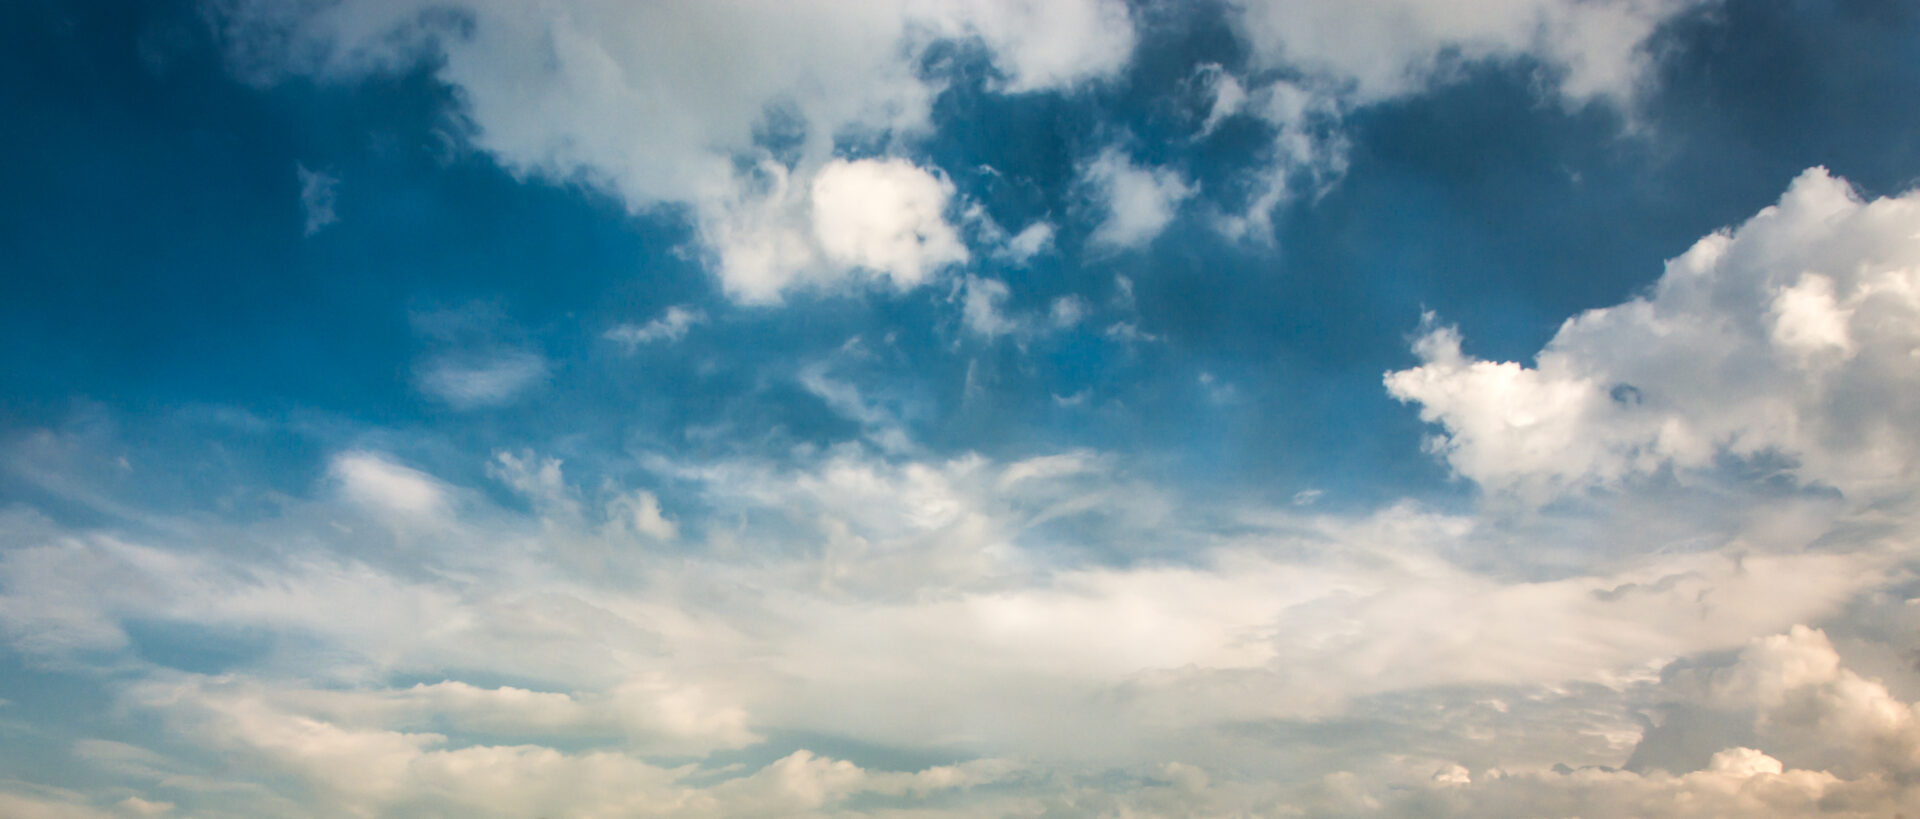 Privacy policy image of sky and clouds